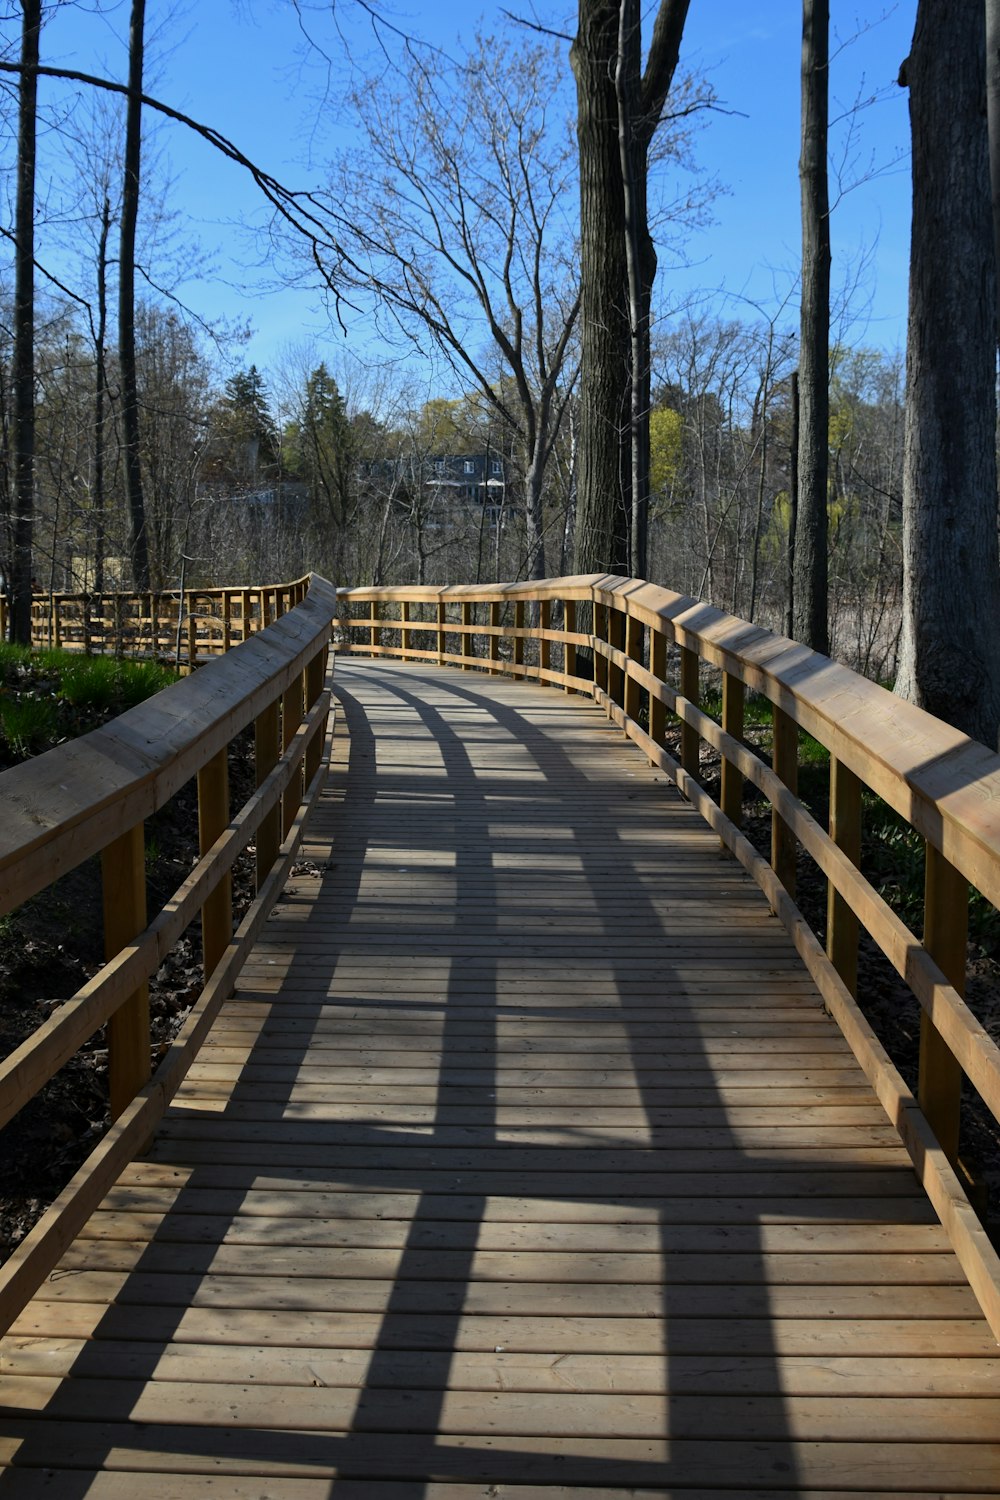 a wooden bridge in the middle of a wooded area